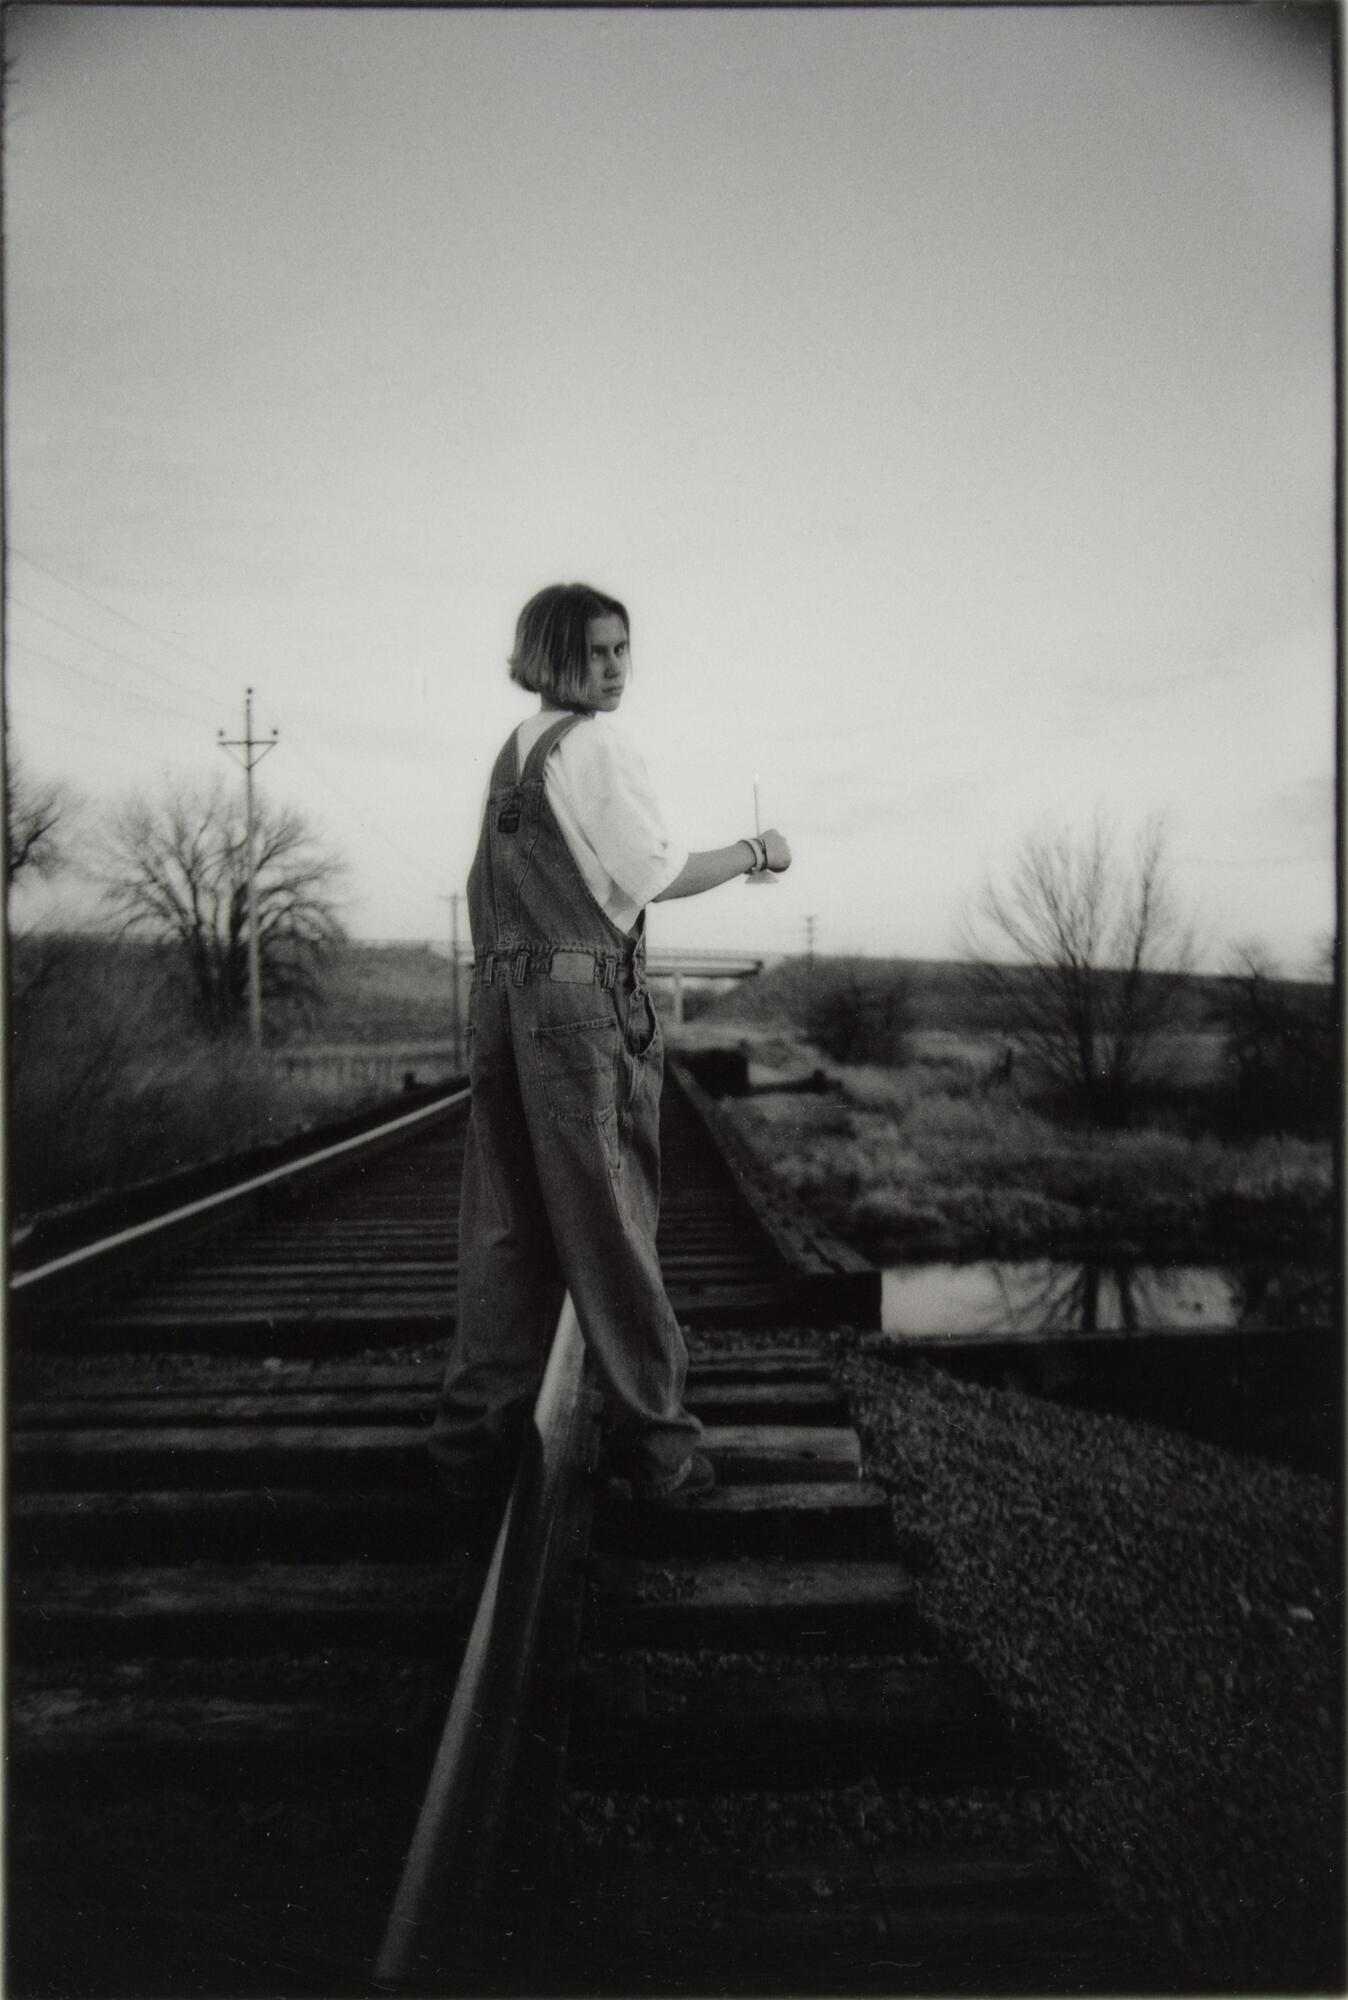 A girl in overalls standing on train tracks. She is looking back at the camera.